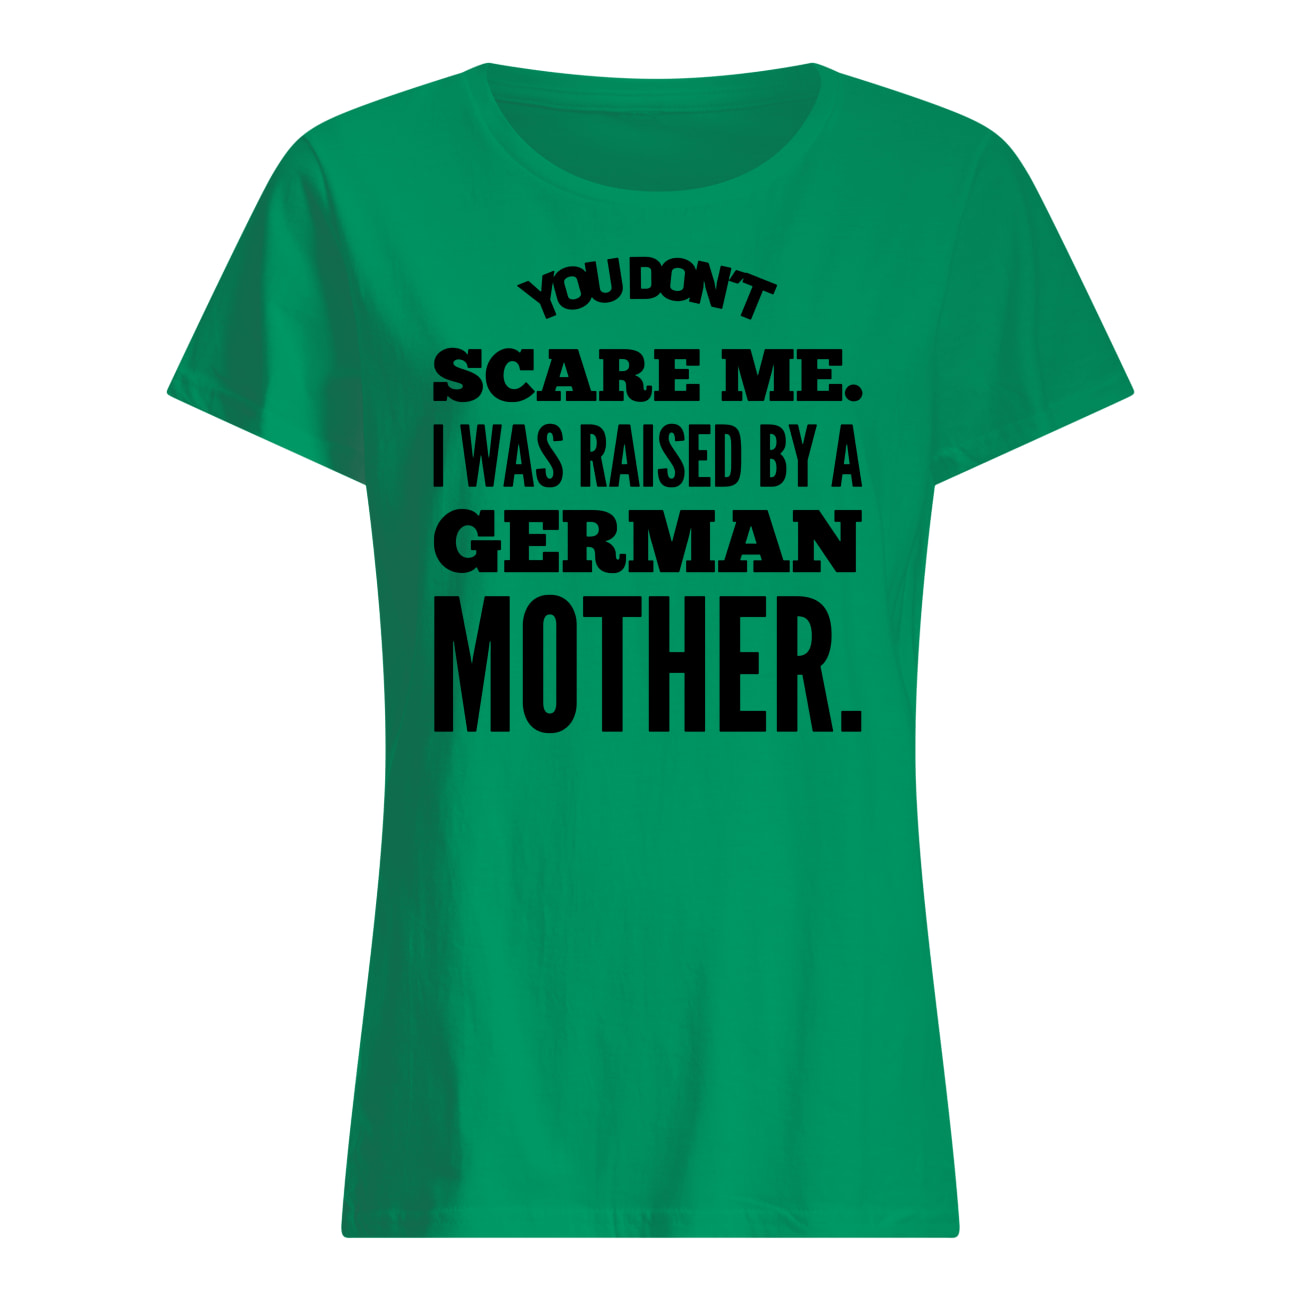 You don't scare me I was raised by a german mother womens shirt